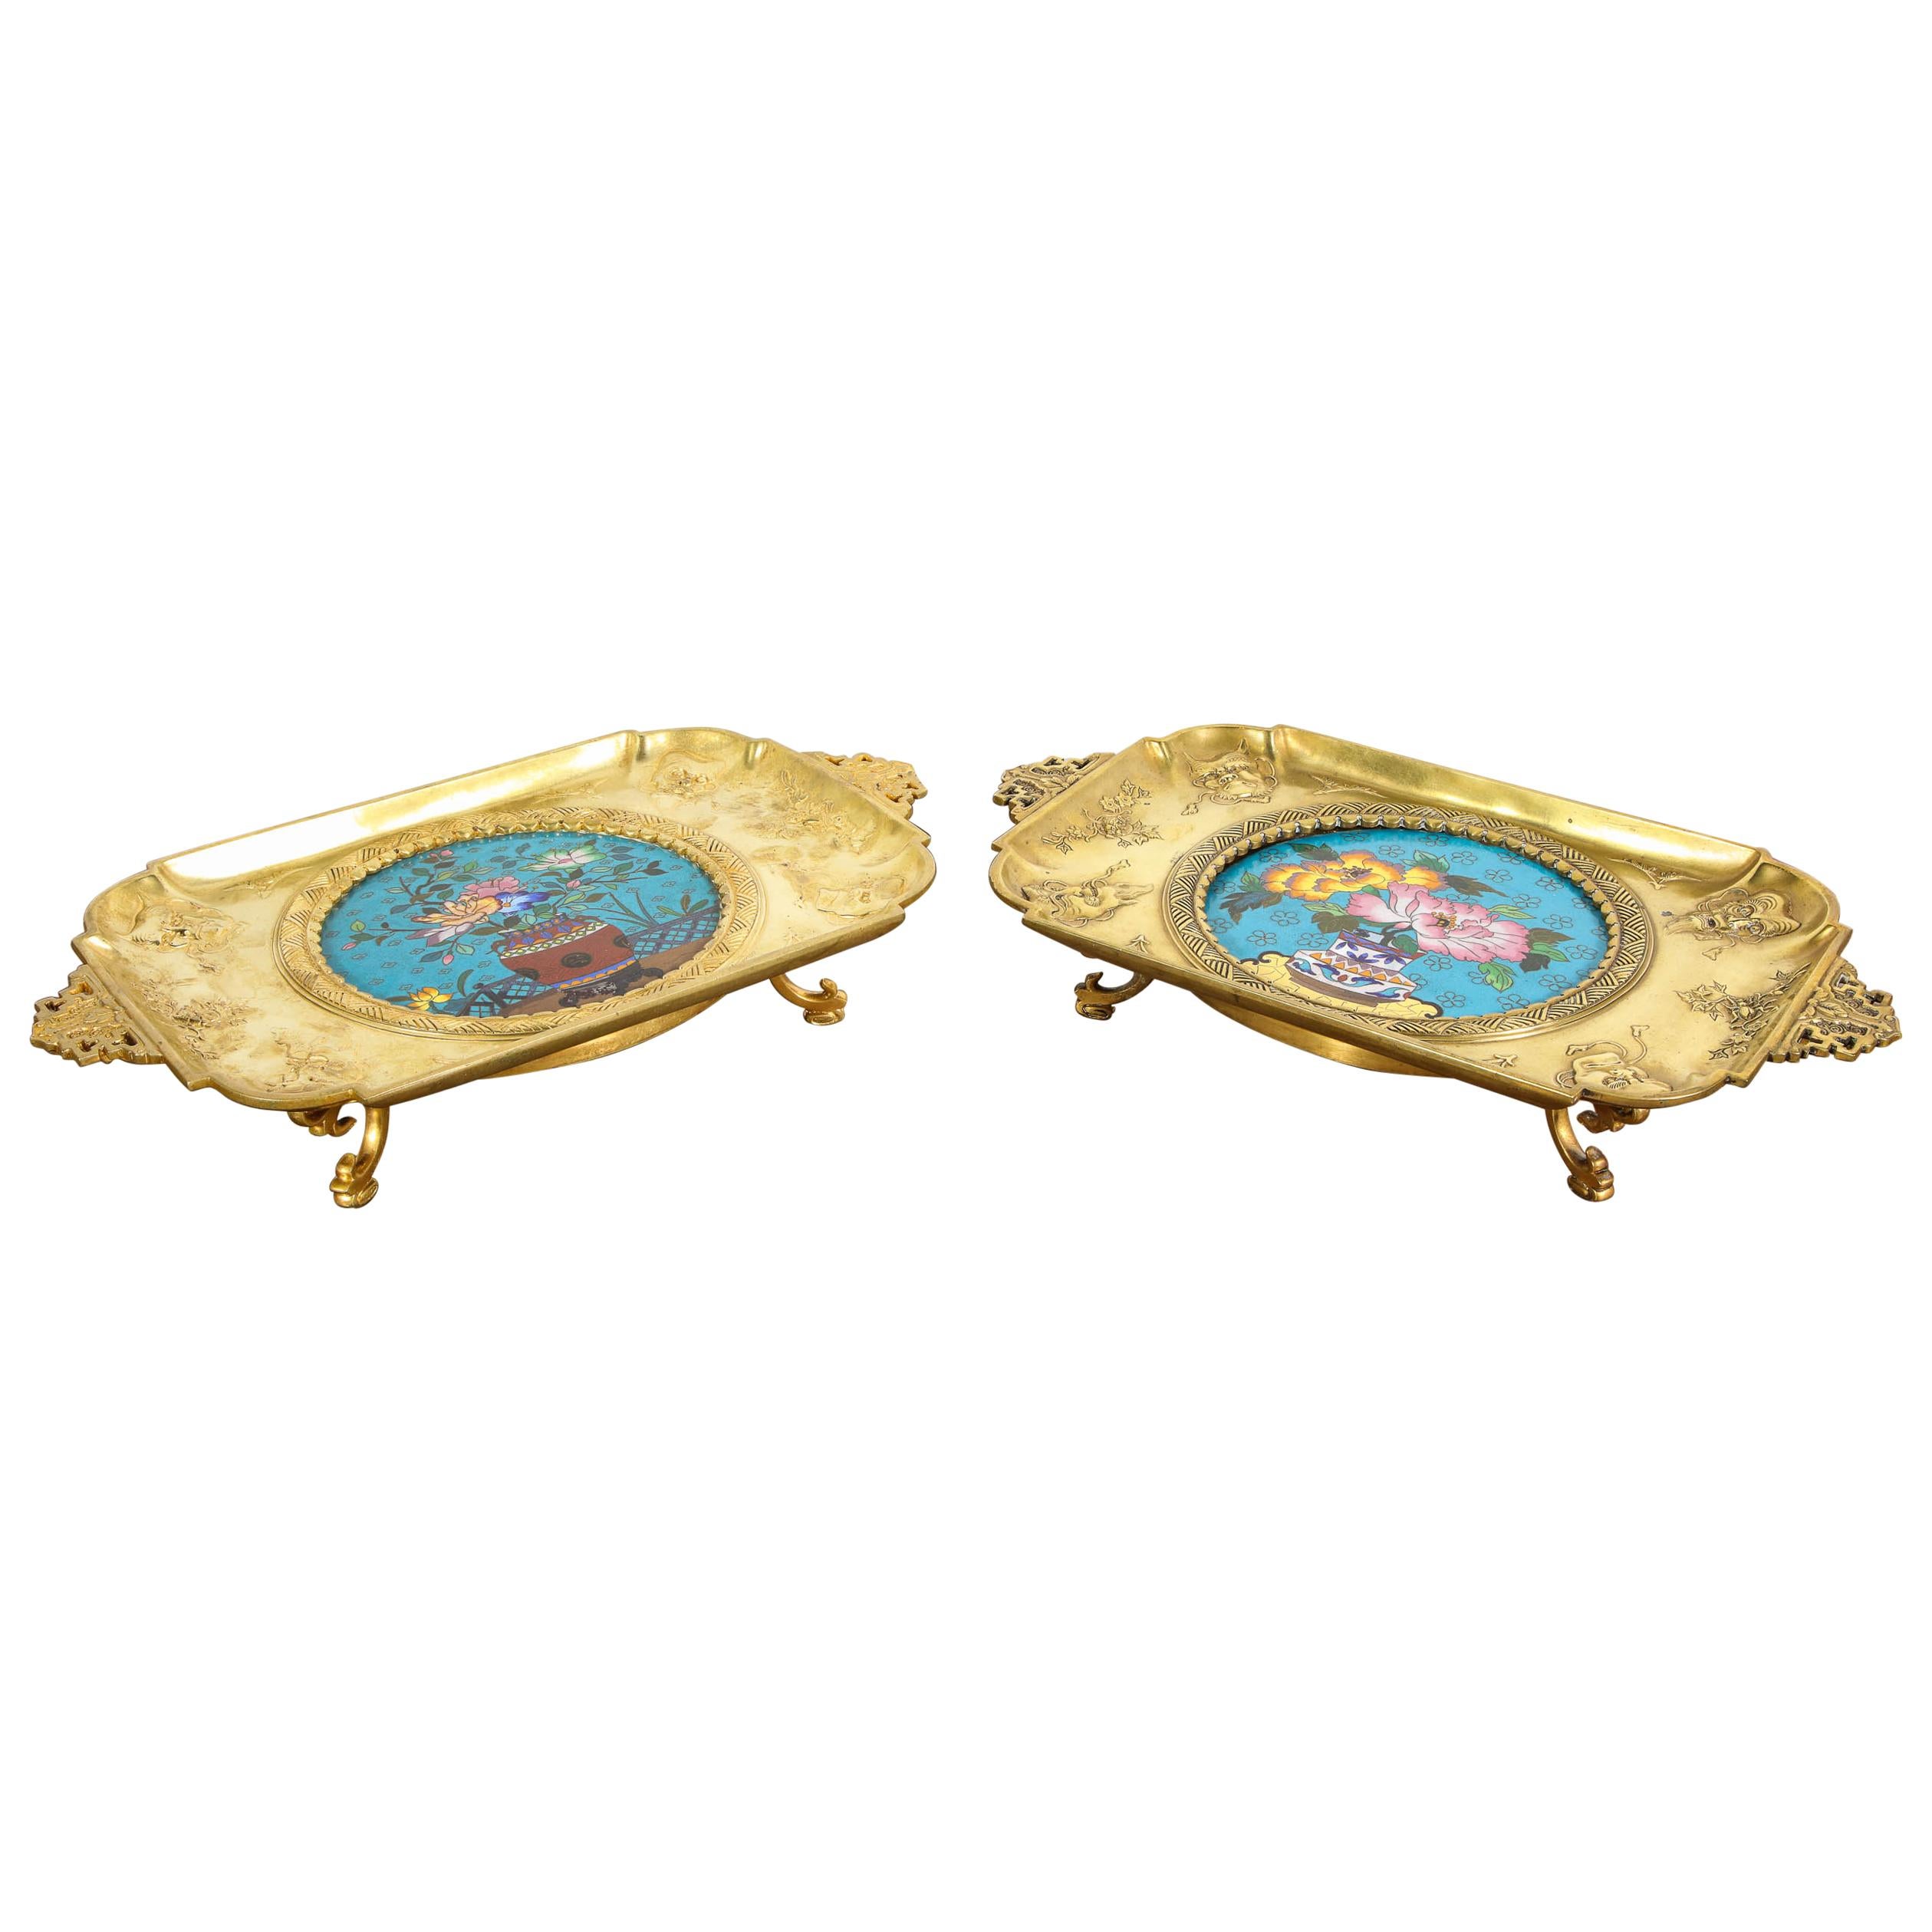 A rare pair of French Japonisme ormolu/bronze and Cloisonne enamel trays attributed to Edouard Lièvre,
late 19th century.

With cloisonne enamel medallions depicting bouquets of flower.

Very finely cast with masks.

Each measures: 3 in. H x